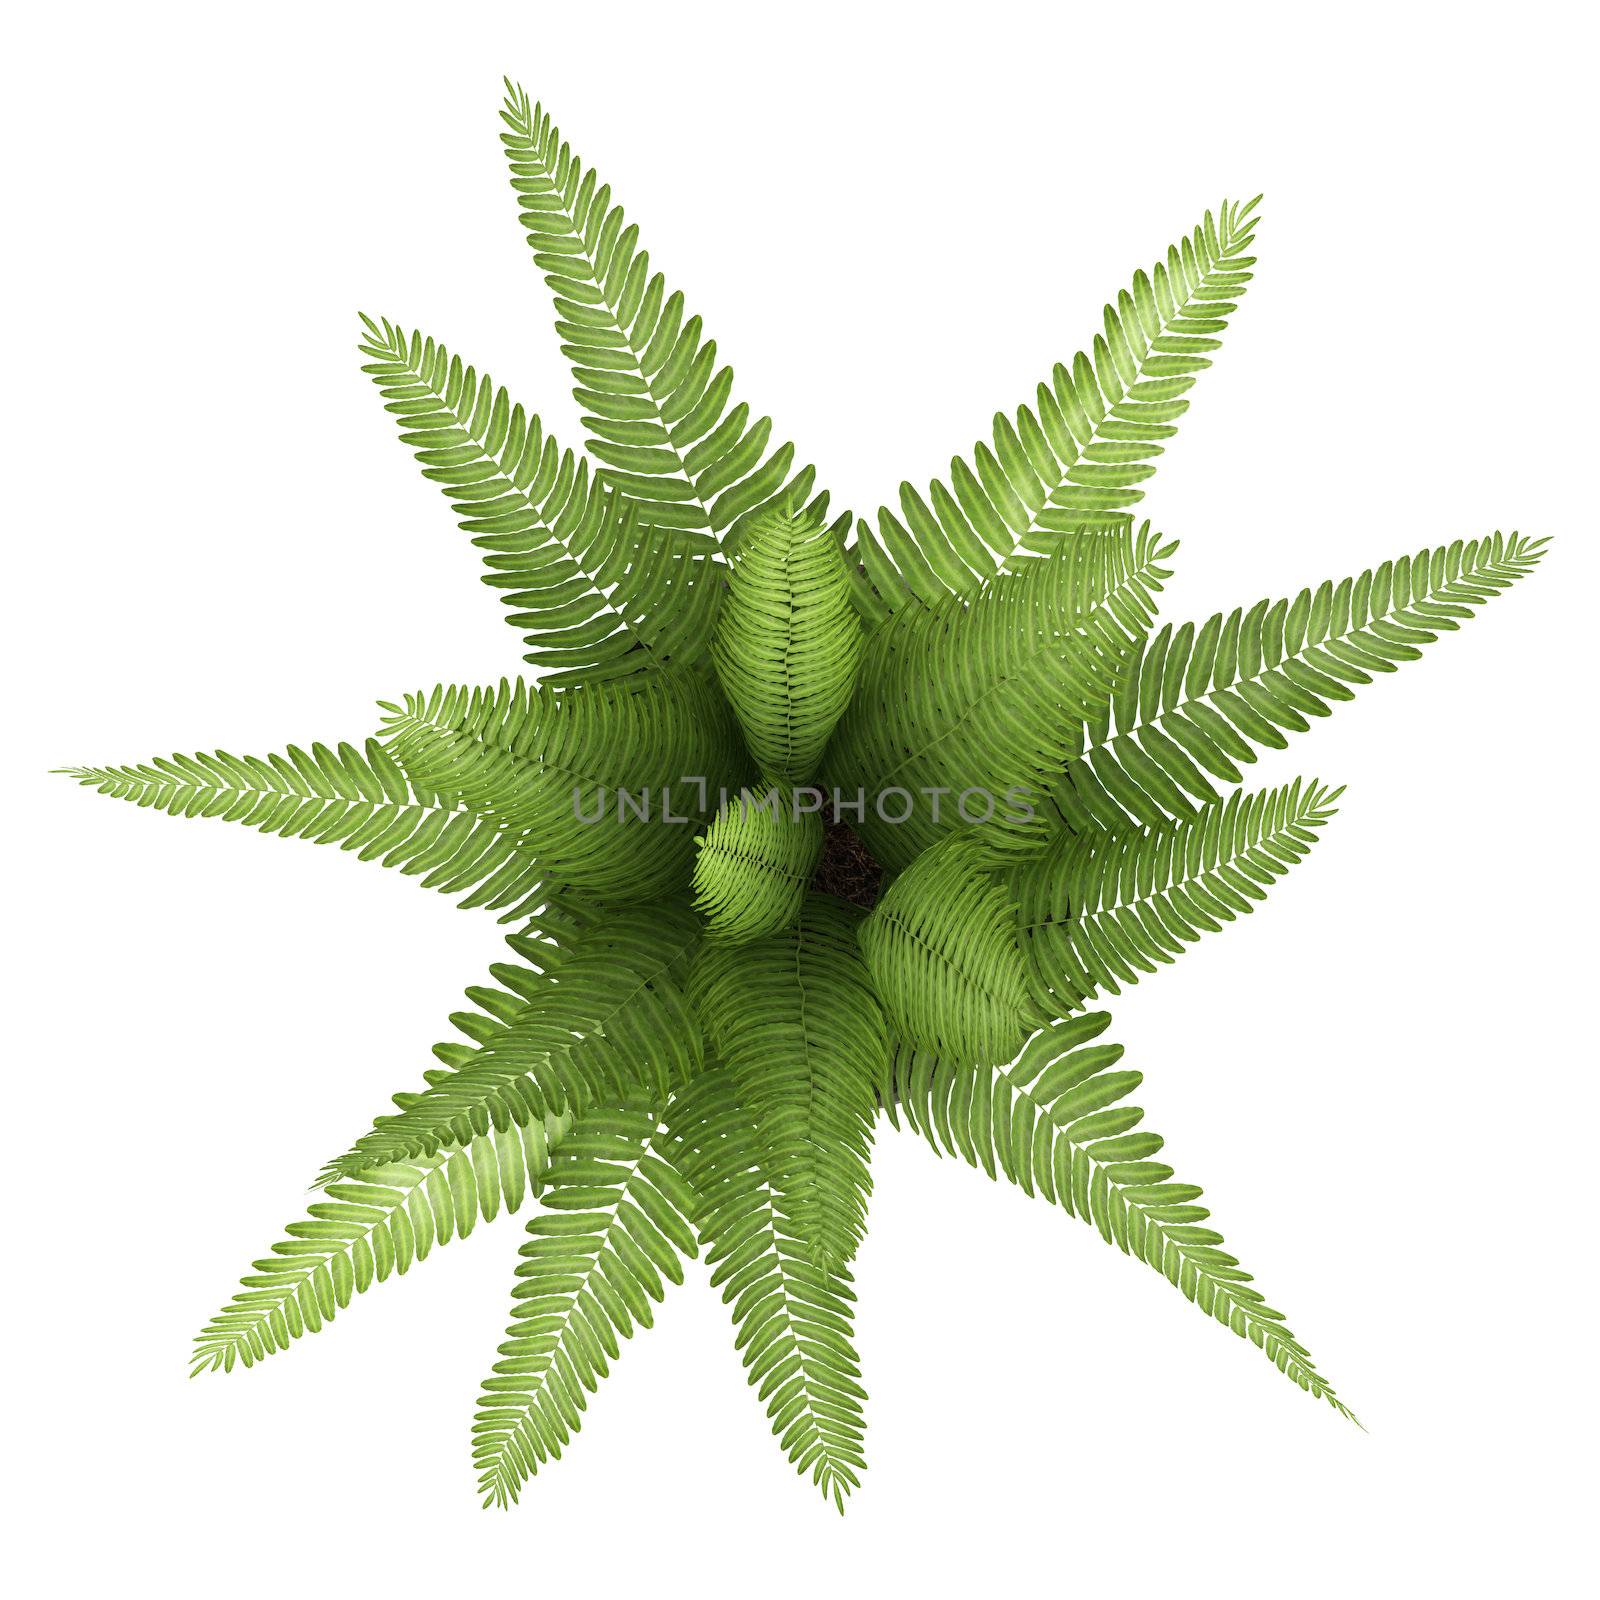 Nephrolepis fern potted up in a container as a decorative foliage houseplant isolated on white